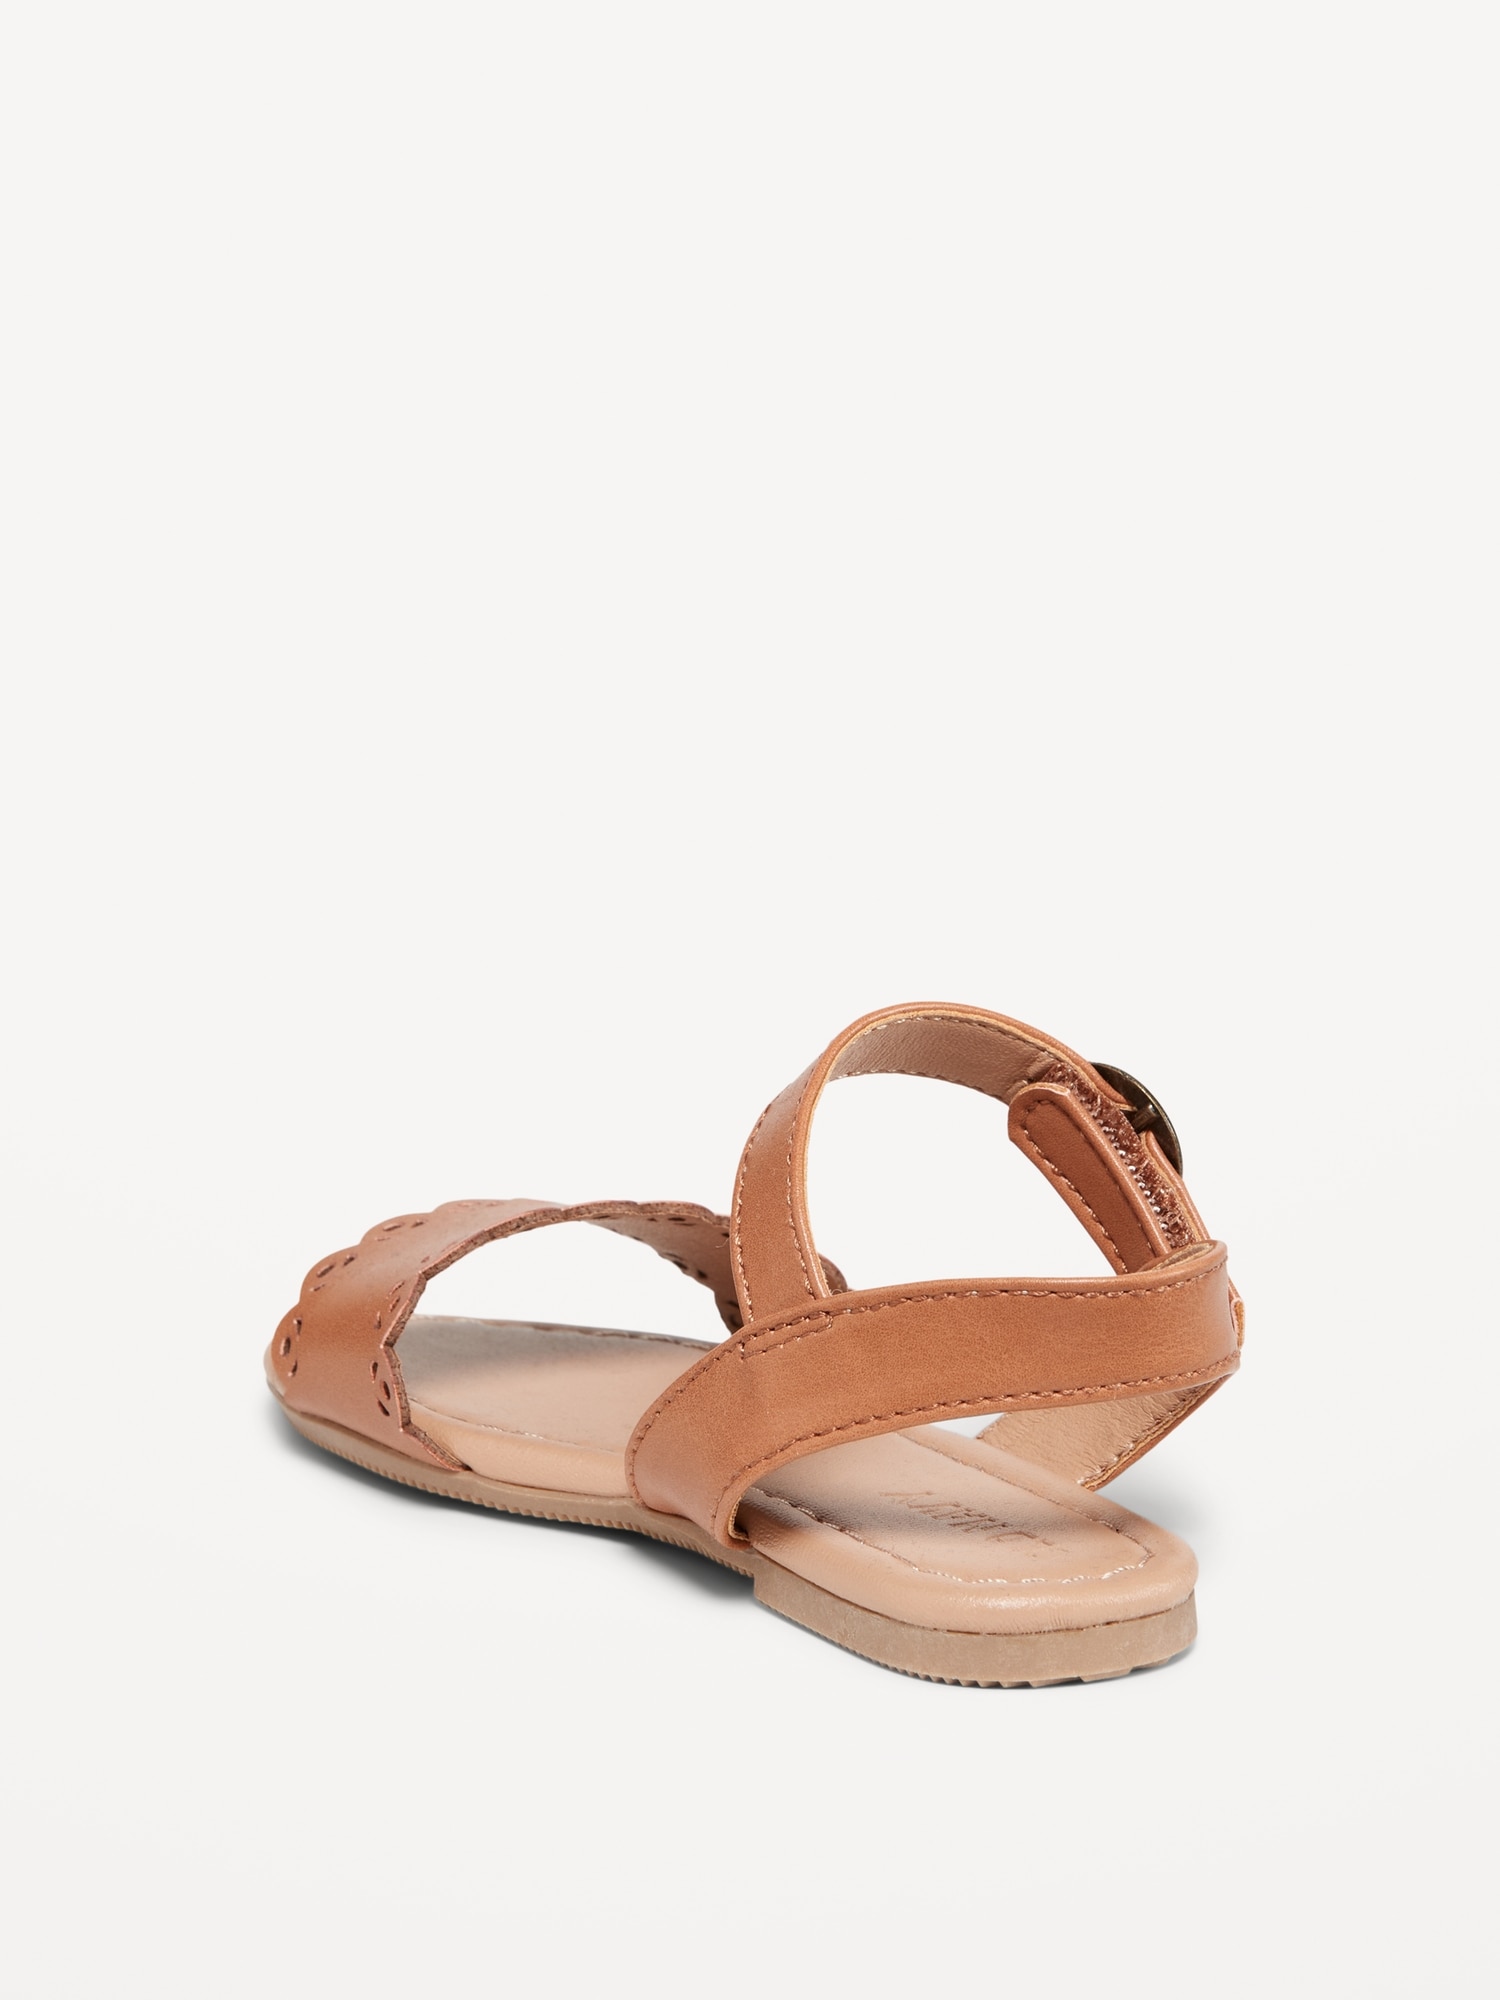 Faux-Leather Scallop-Trim Sandals for Toddler Girls | Old Navy